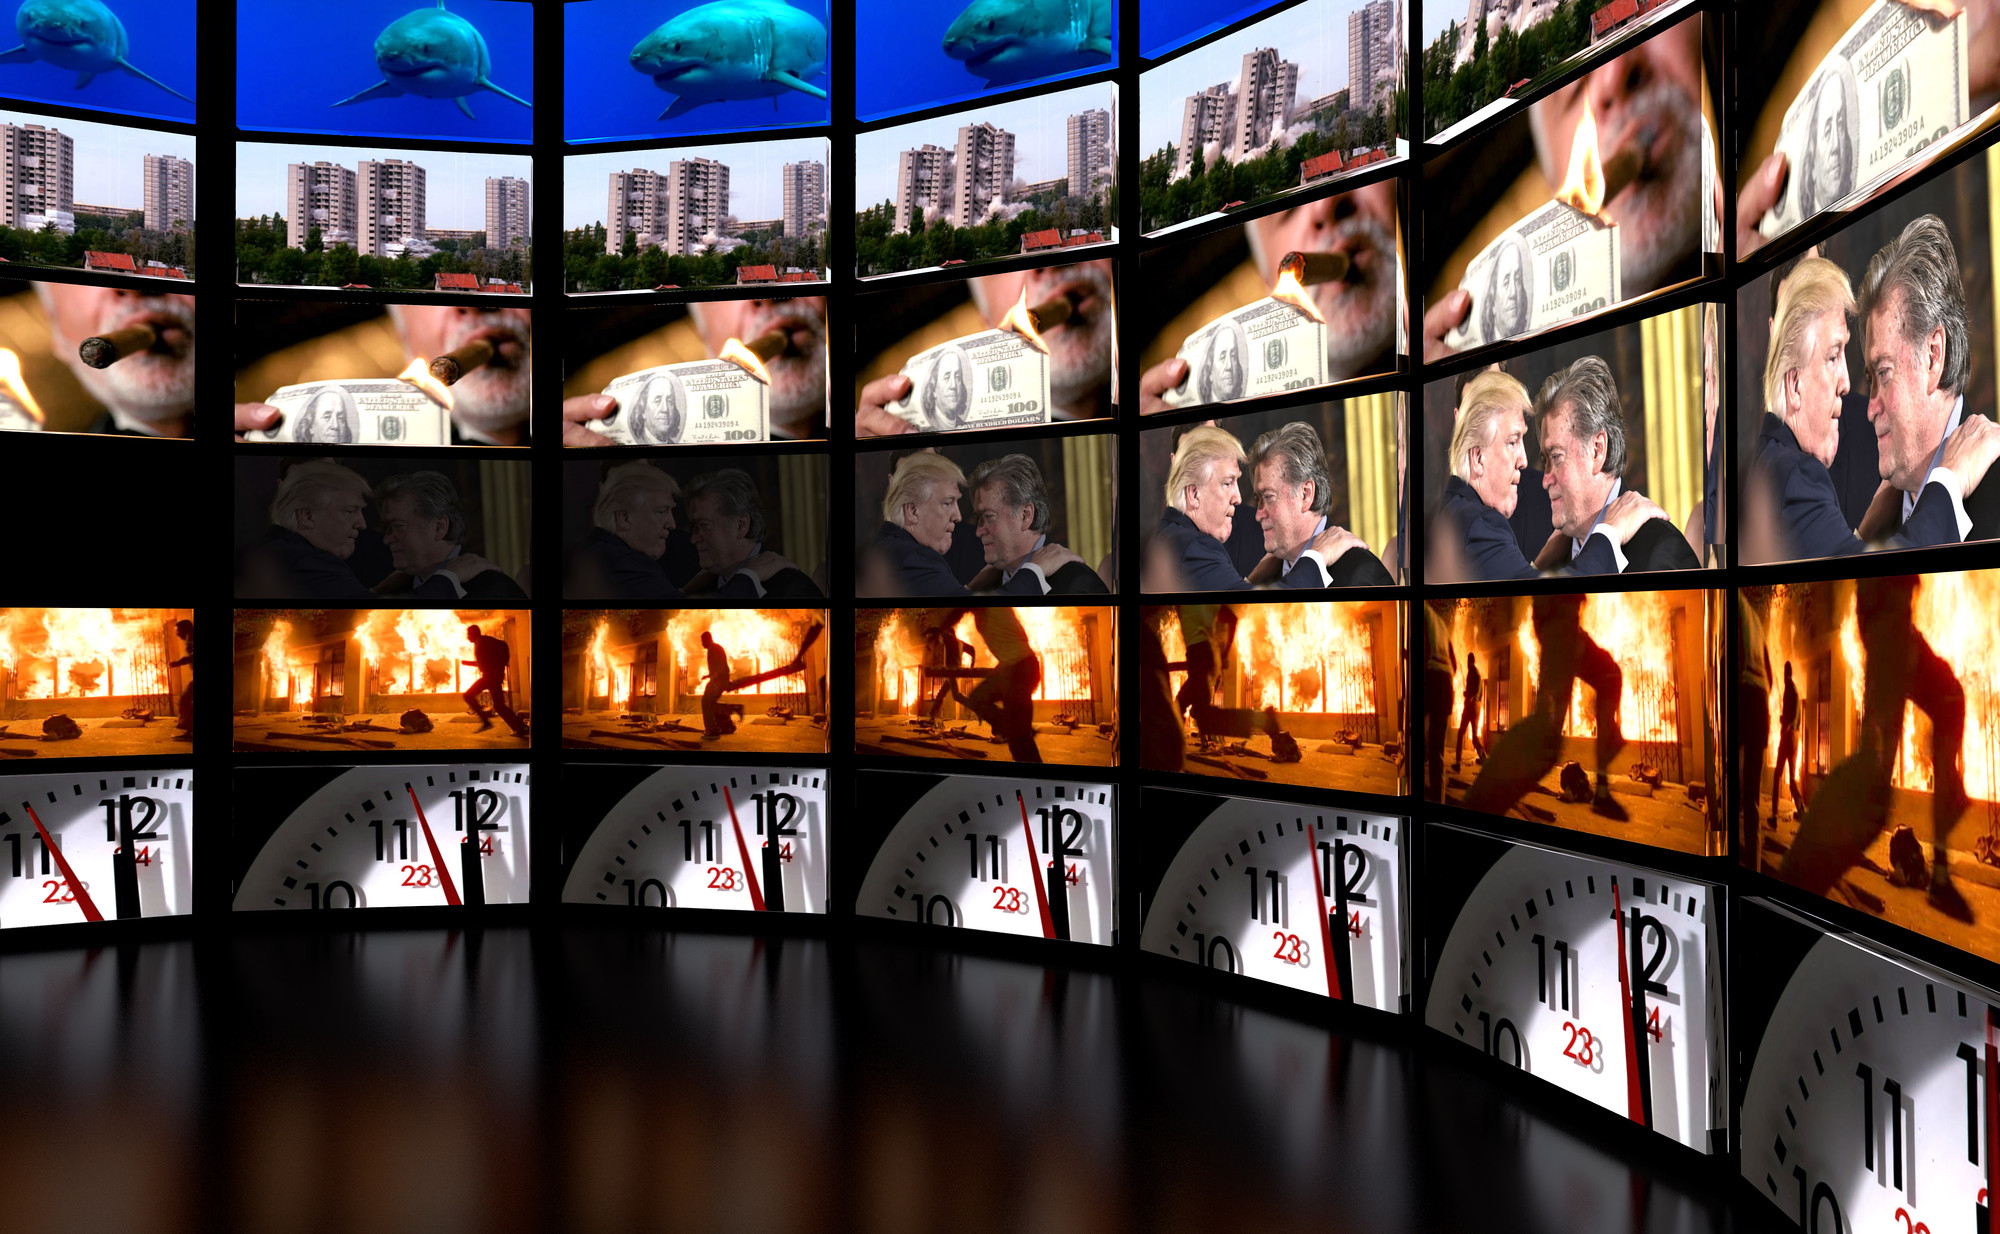 Images are shown across a grid of screens, with each of six rows showing the same images. From bottom to top, they show what appears to be a clock, legs in front of a fire, two men talking, a hand holding money, housing towers, and a shark.